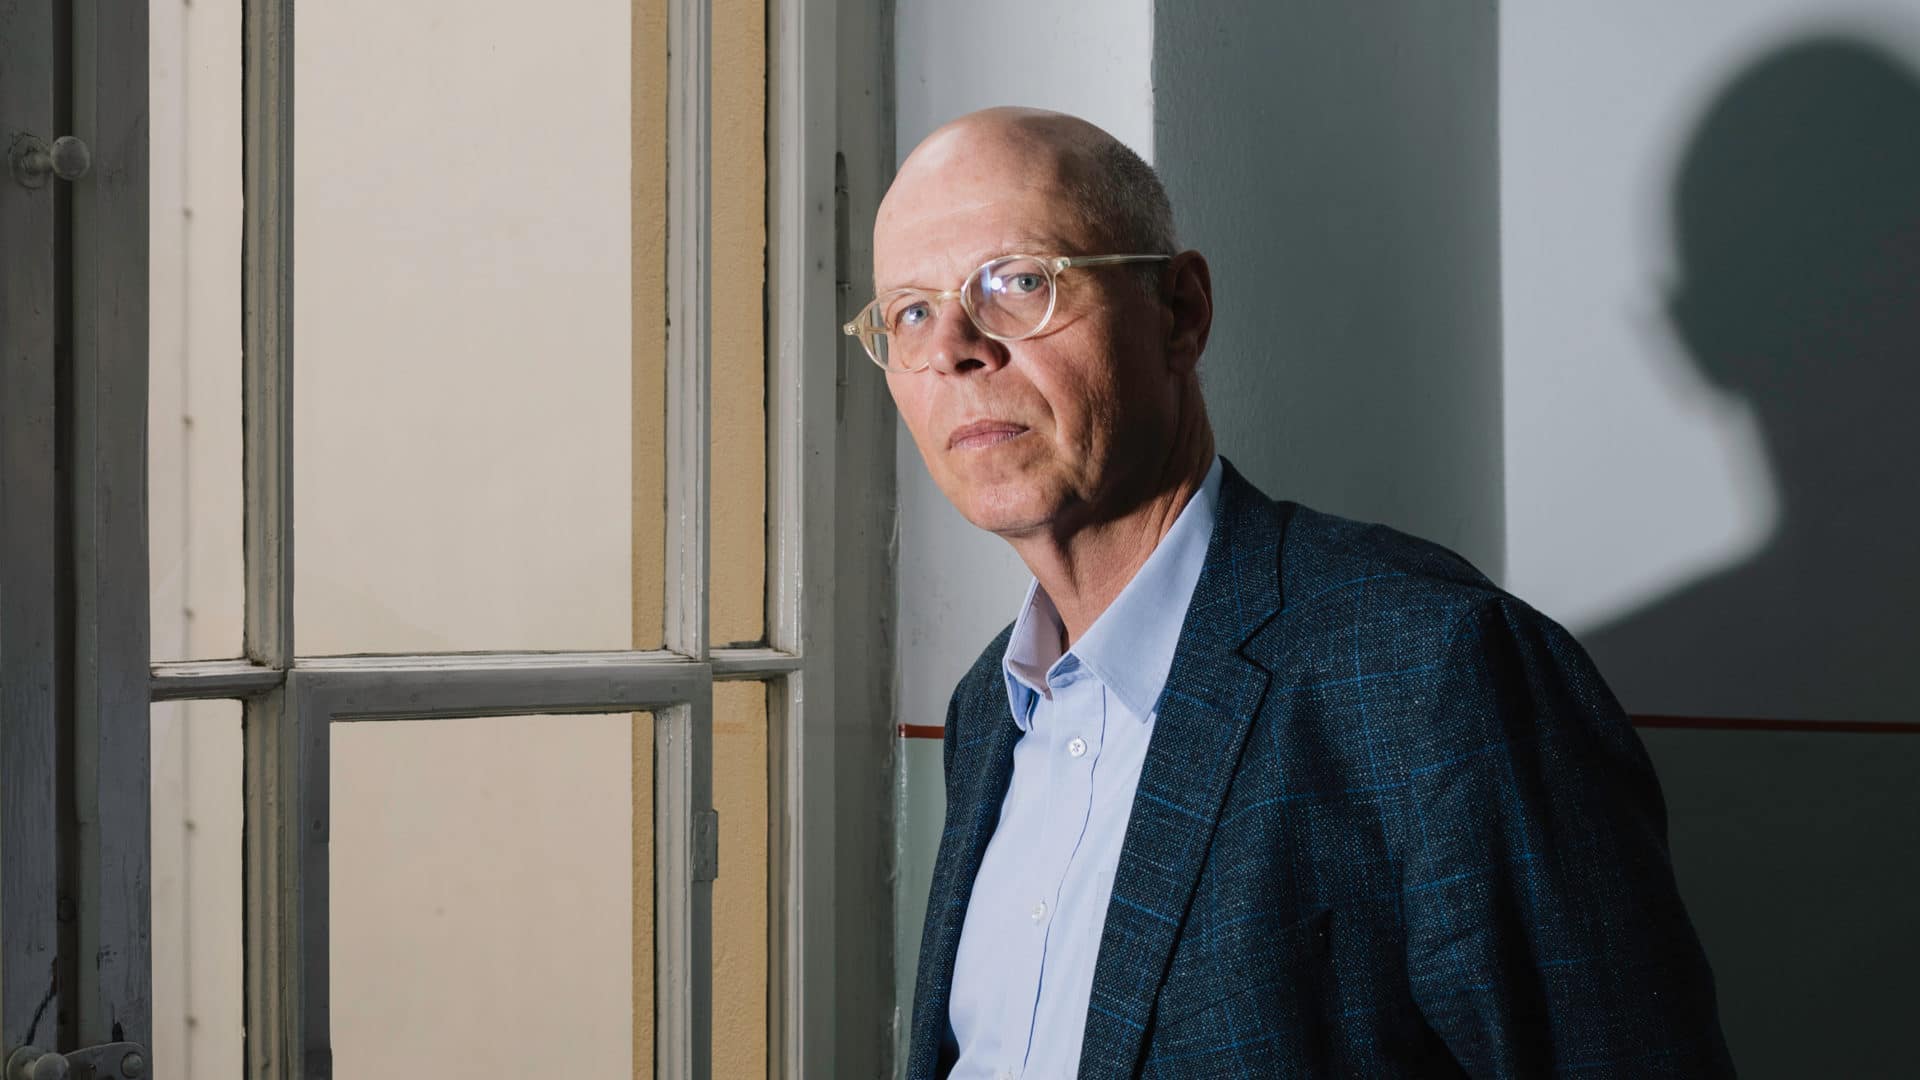 Klaus Beier is the director of the Institute of Sexology and Sexual Medicine. For more than 15 years, Beier has been running Project Dunkelfeld, a treatment program for pedophilia that aims to prevent the sexual abuse of children.